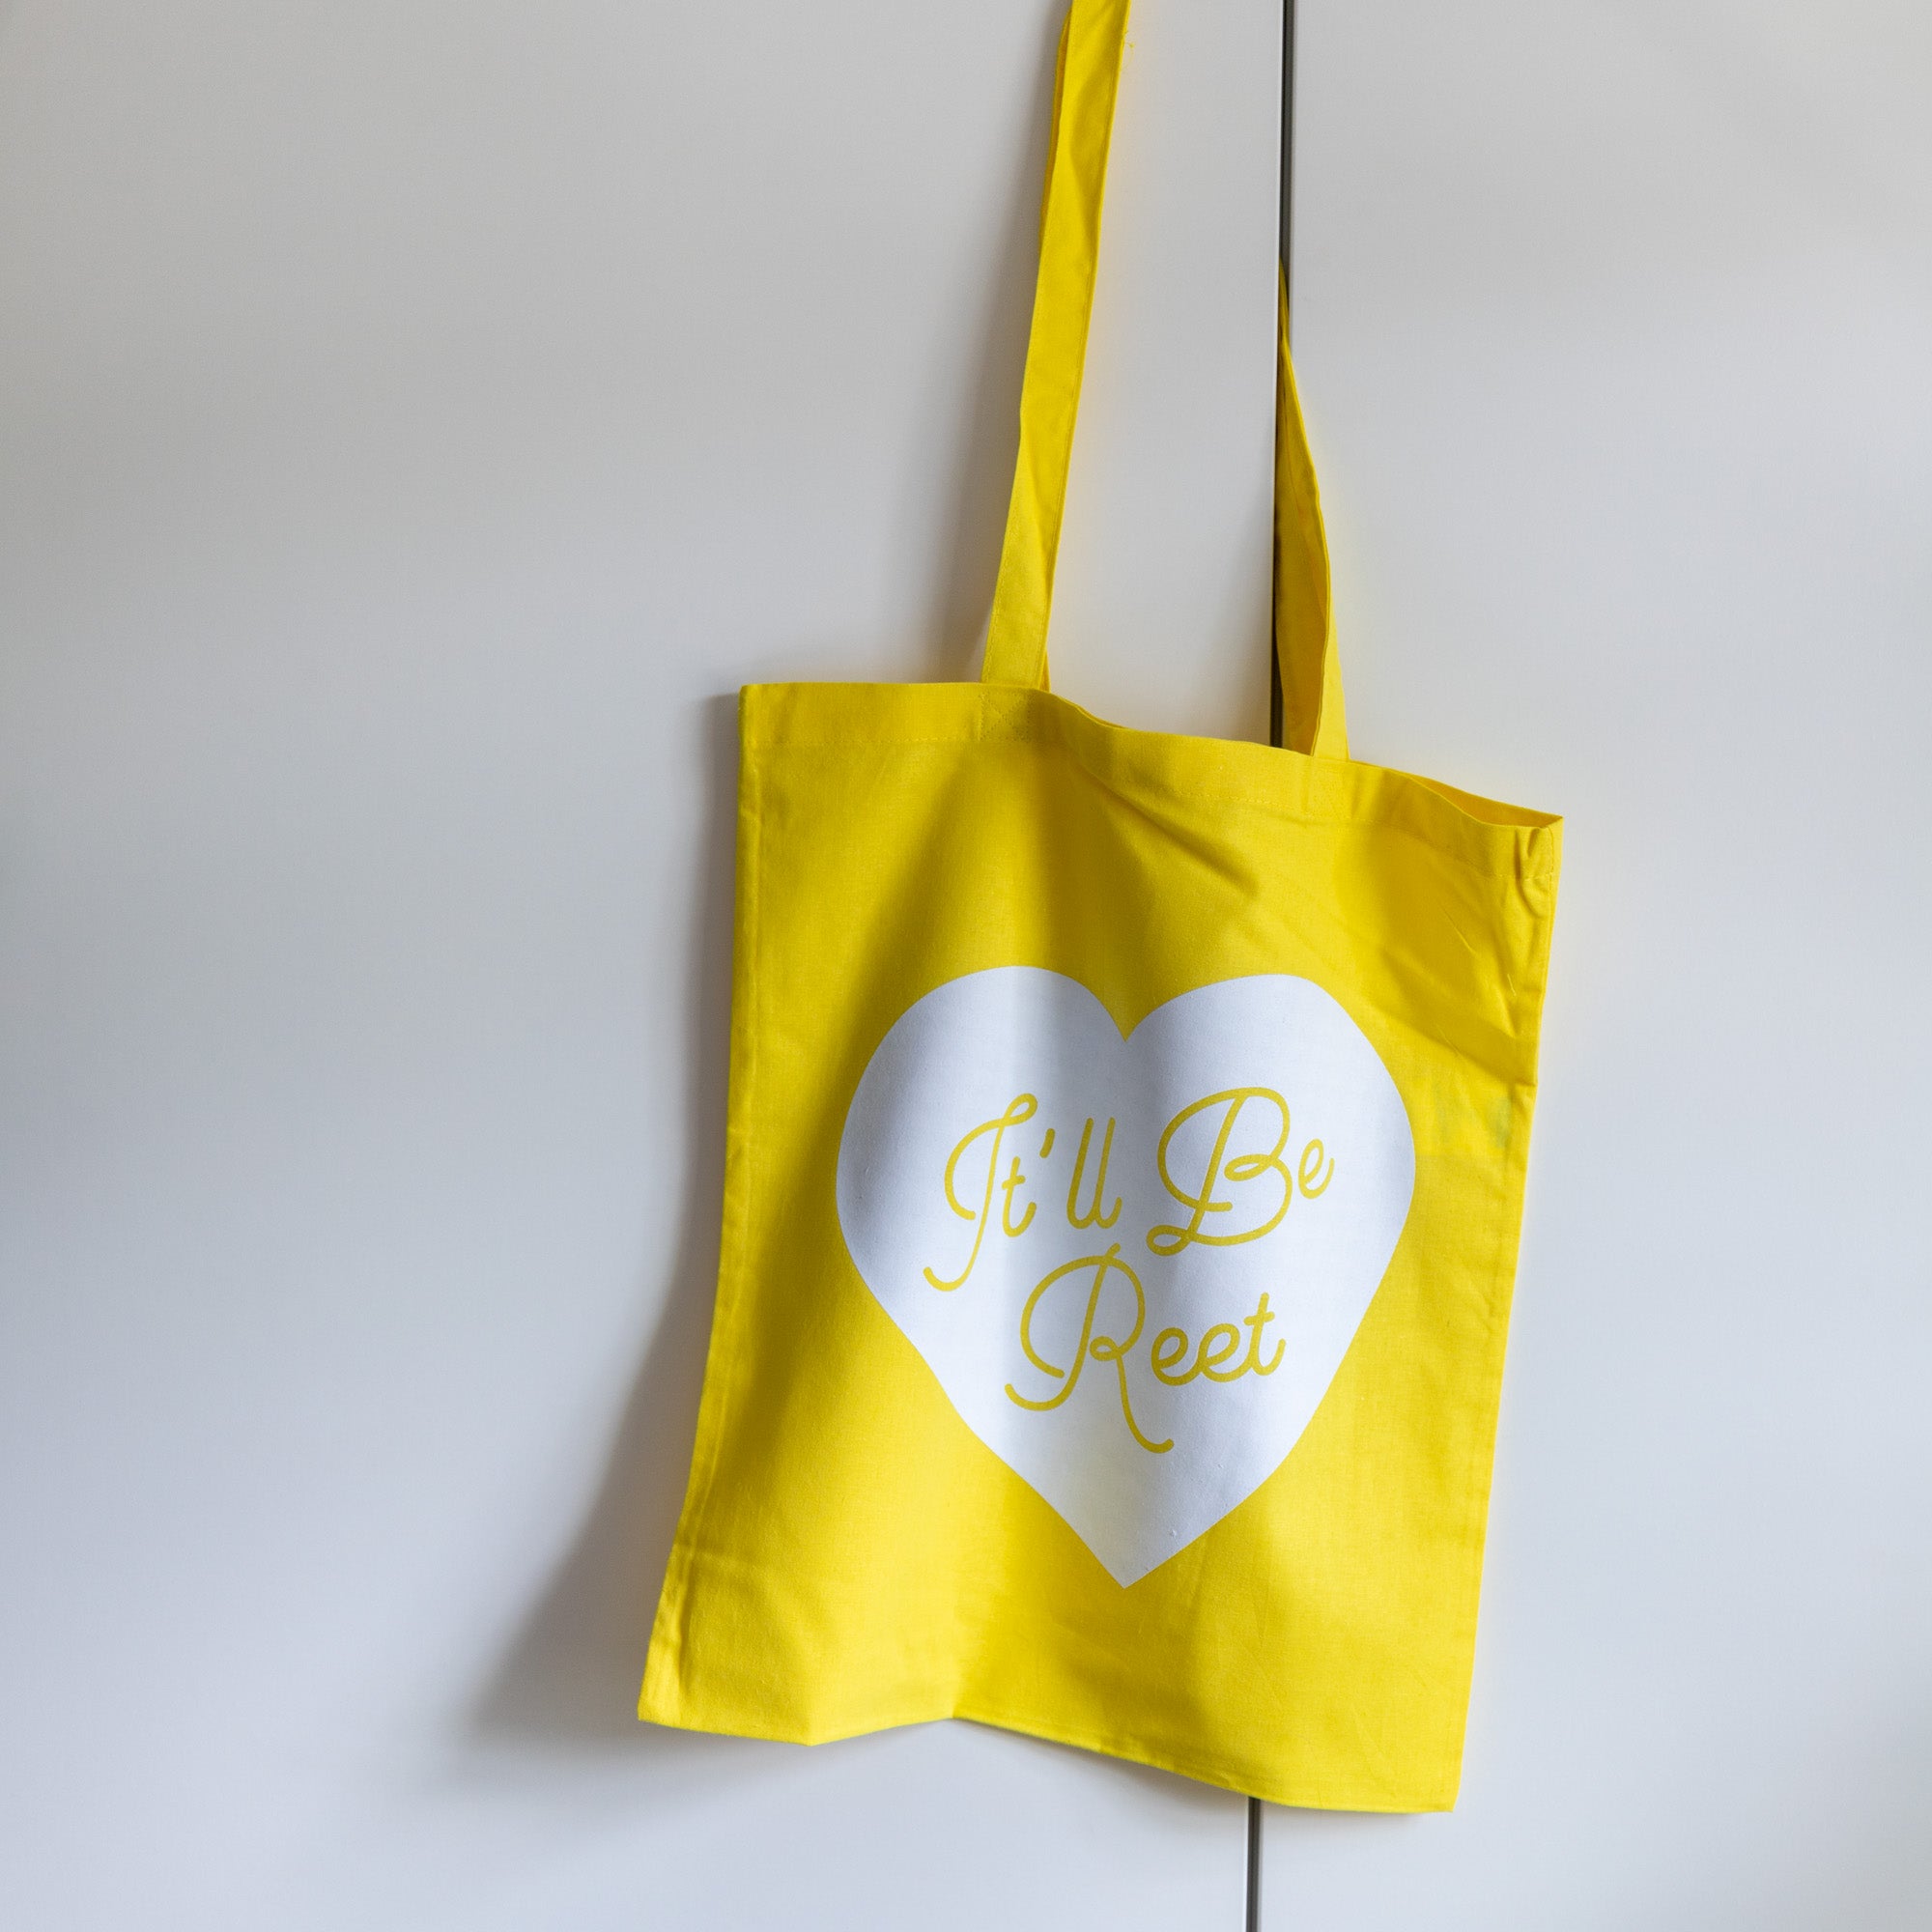 Yellow tote bag with white heart and It'll be reet printed slogan